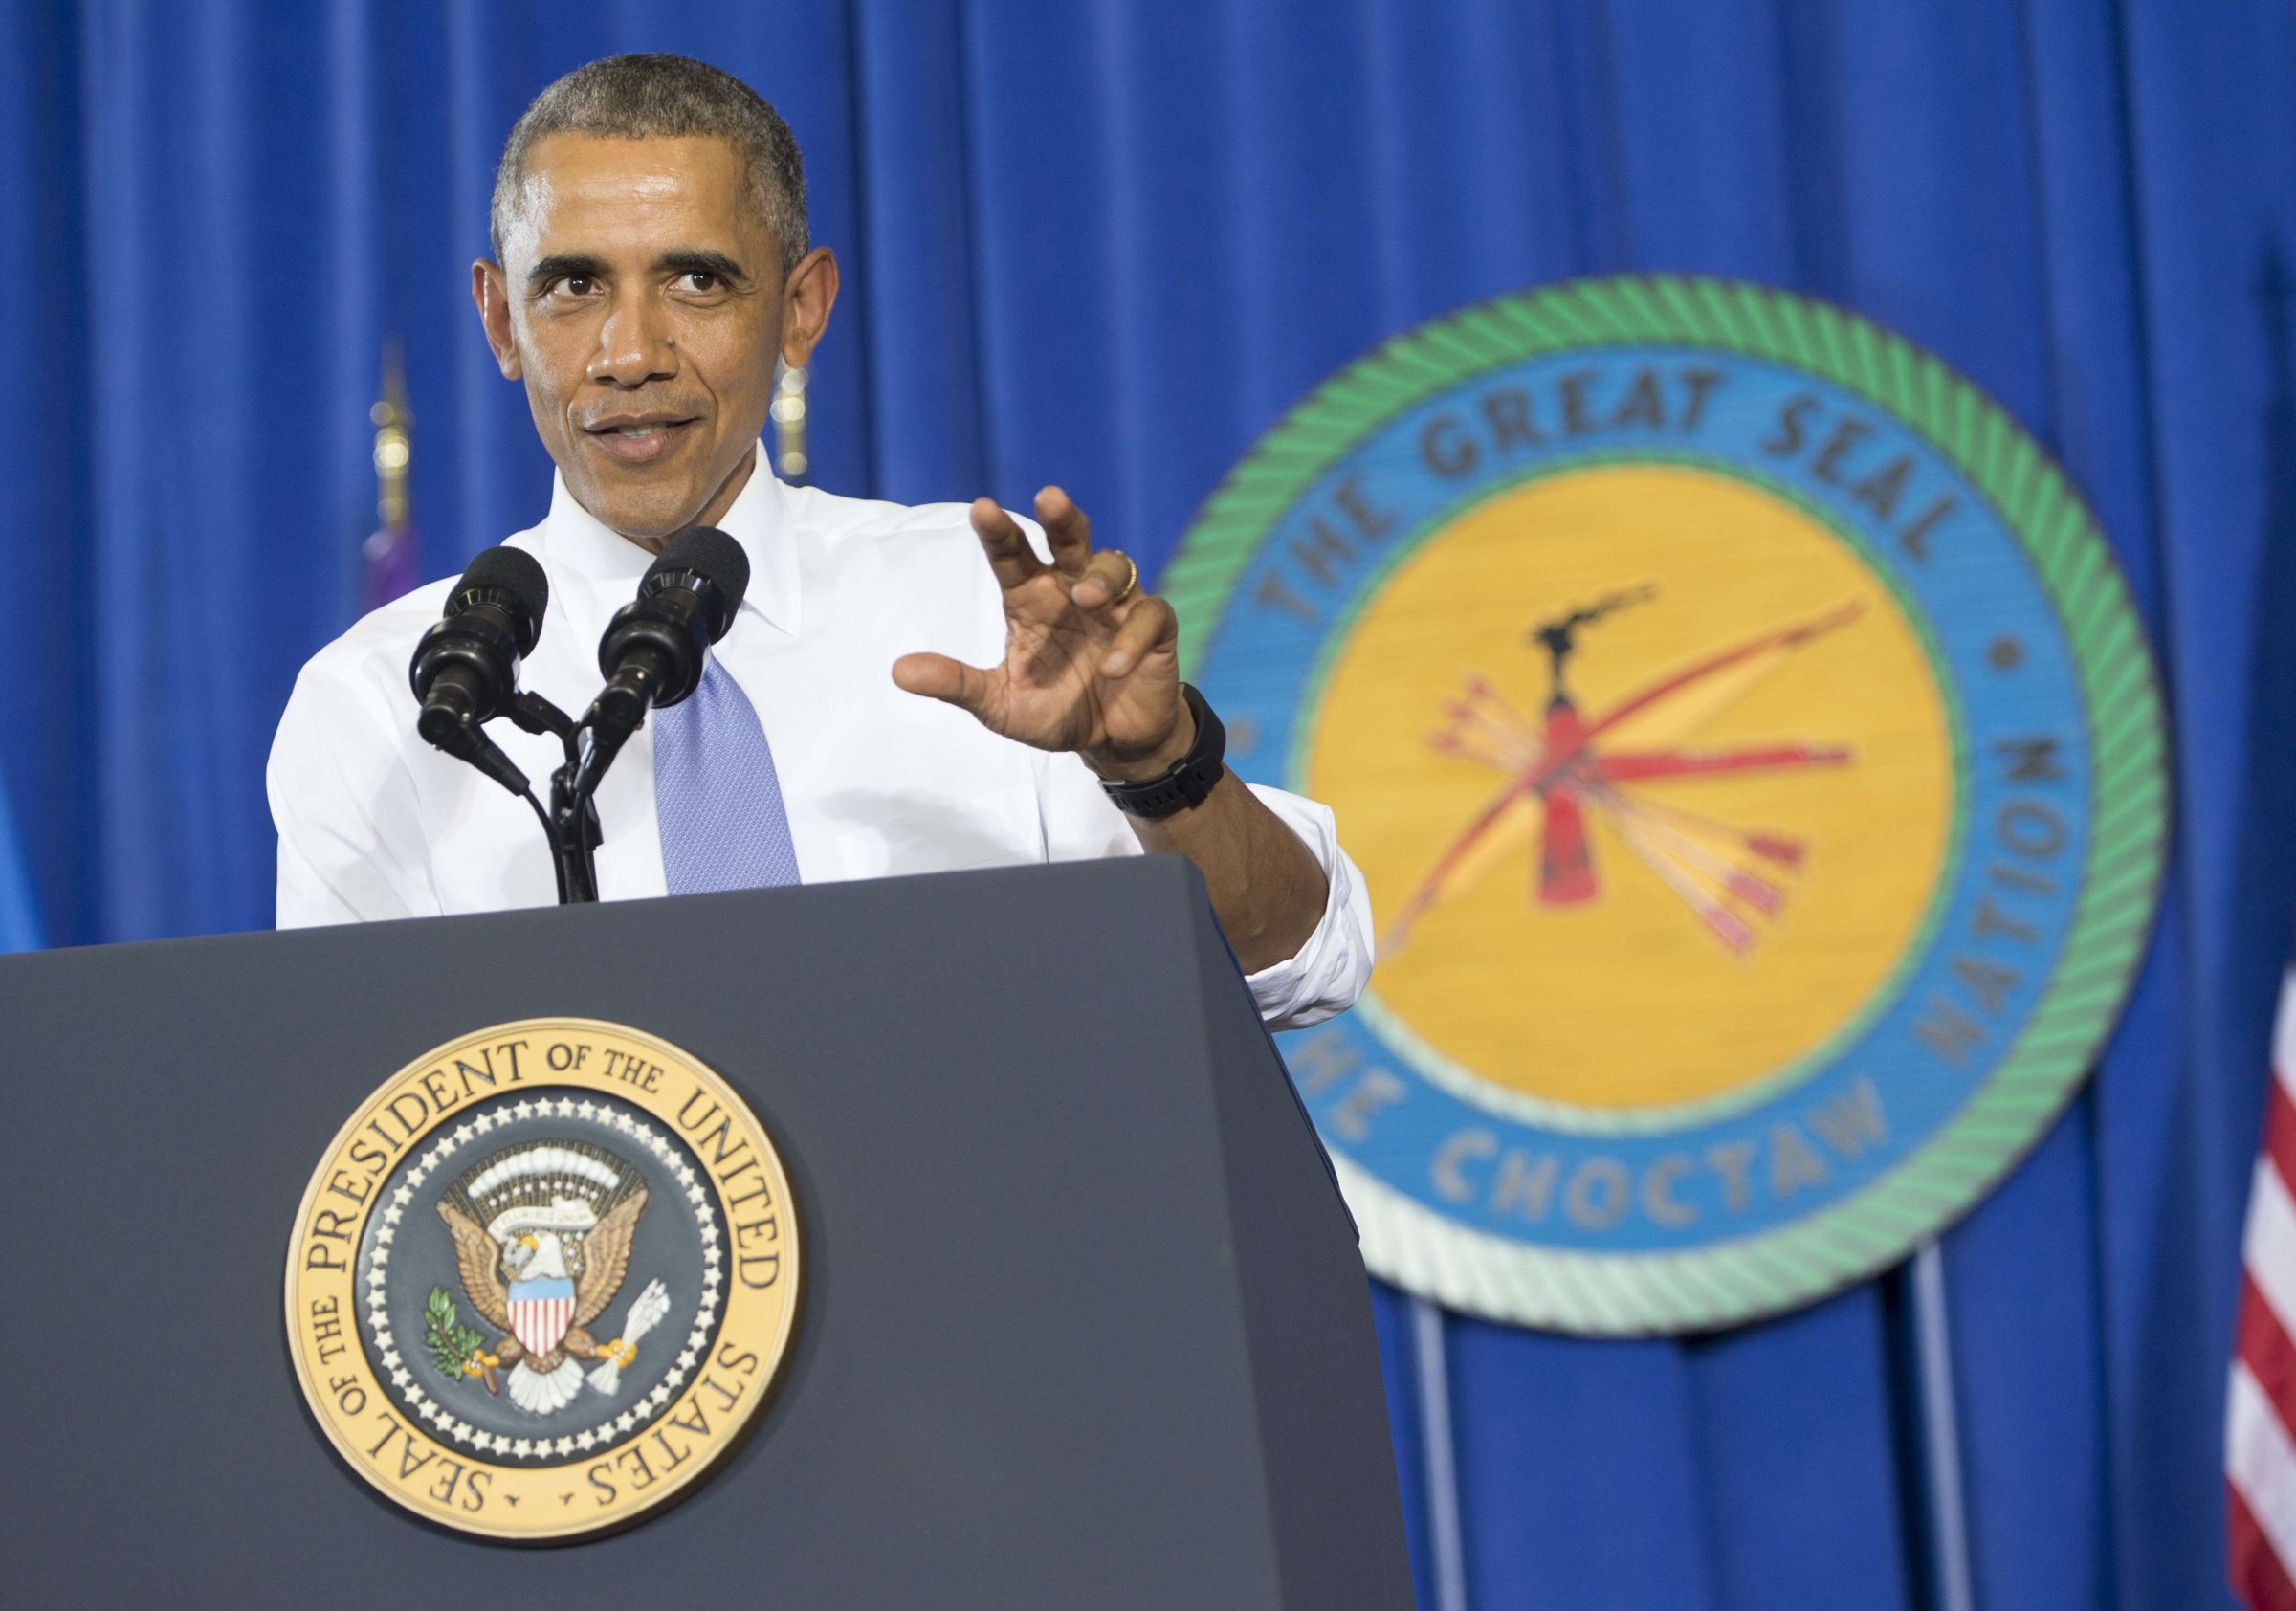 President Barack Obama speaks about economic opportunities at Durant High School in Durant, Oklahoma, in the Choctaw Nation on July 15, 2015.